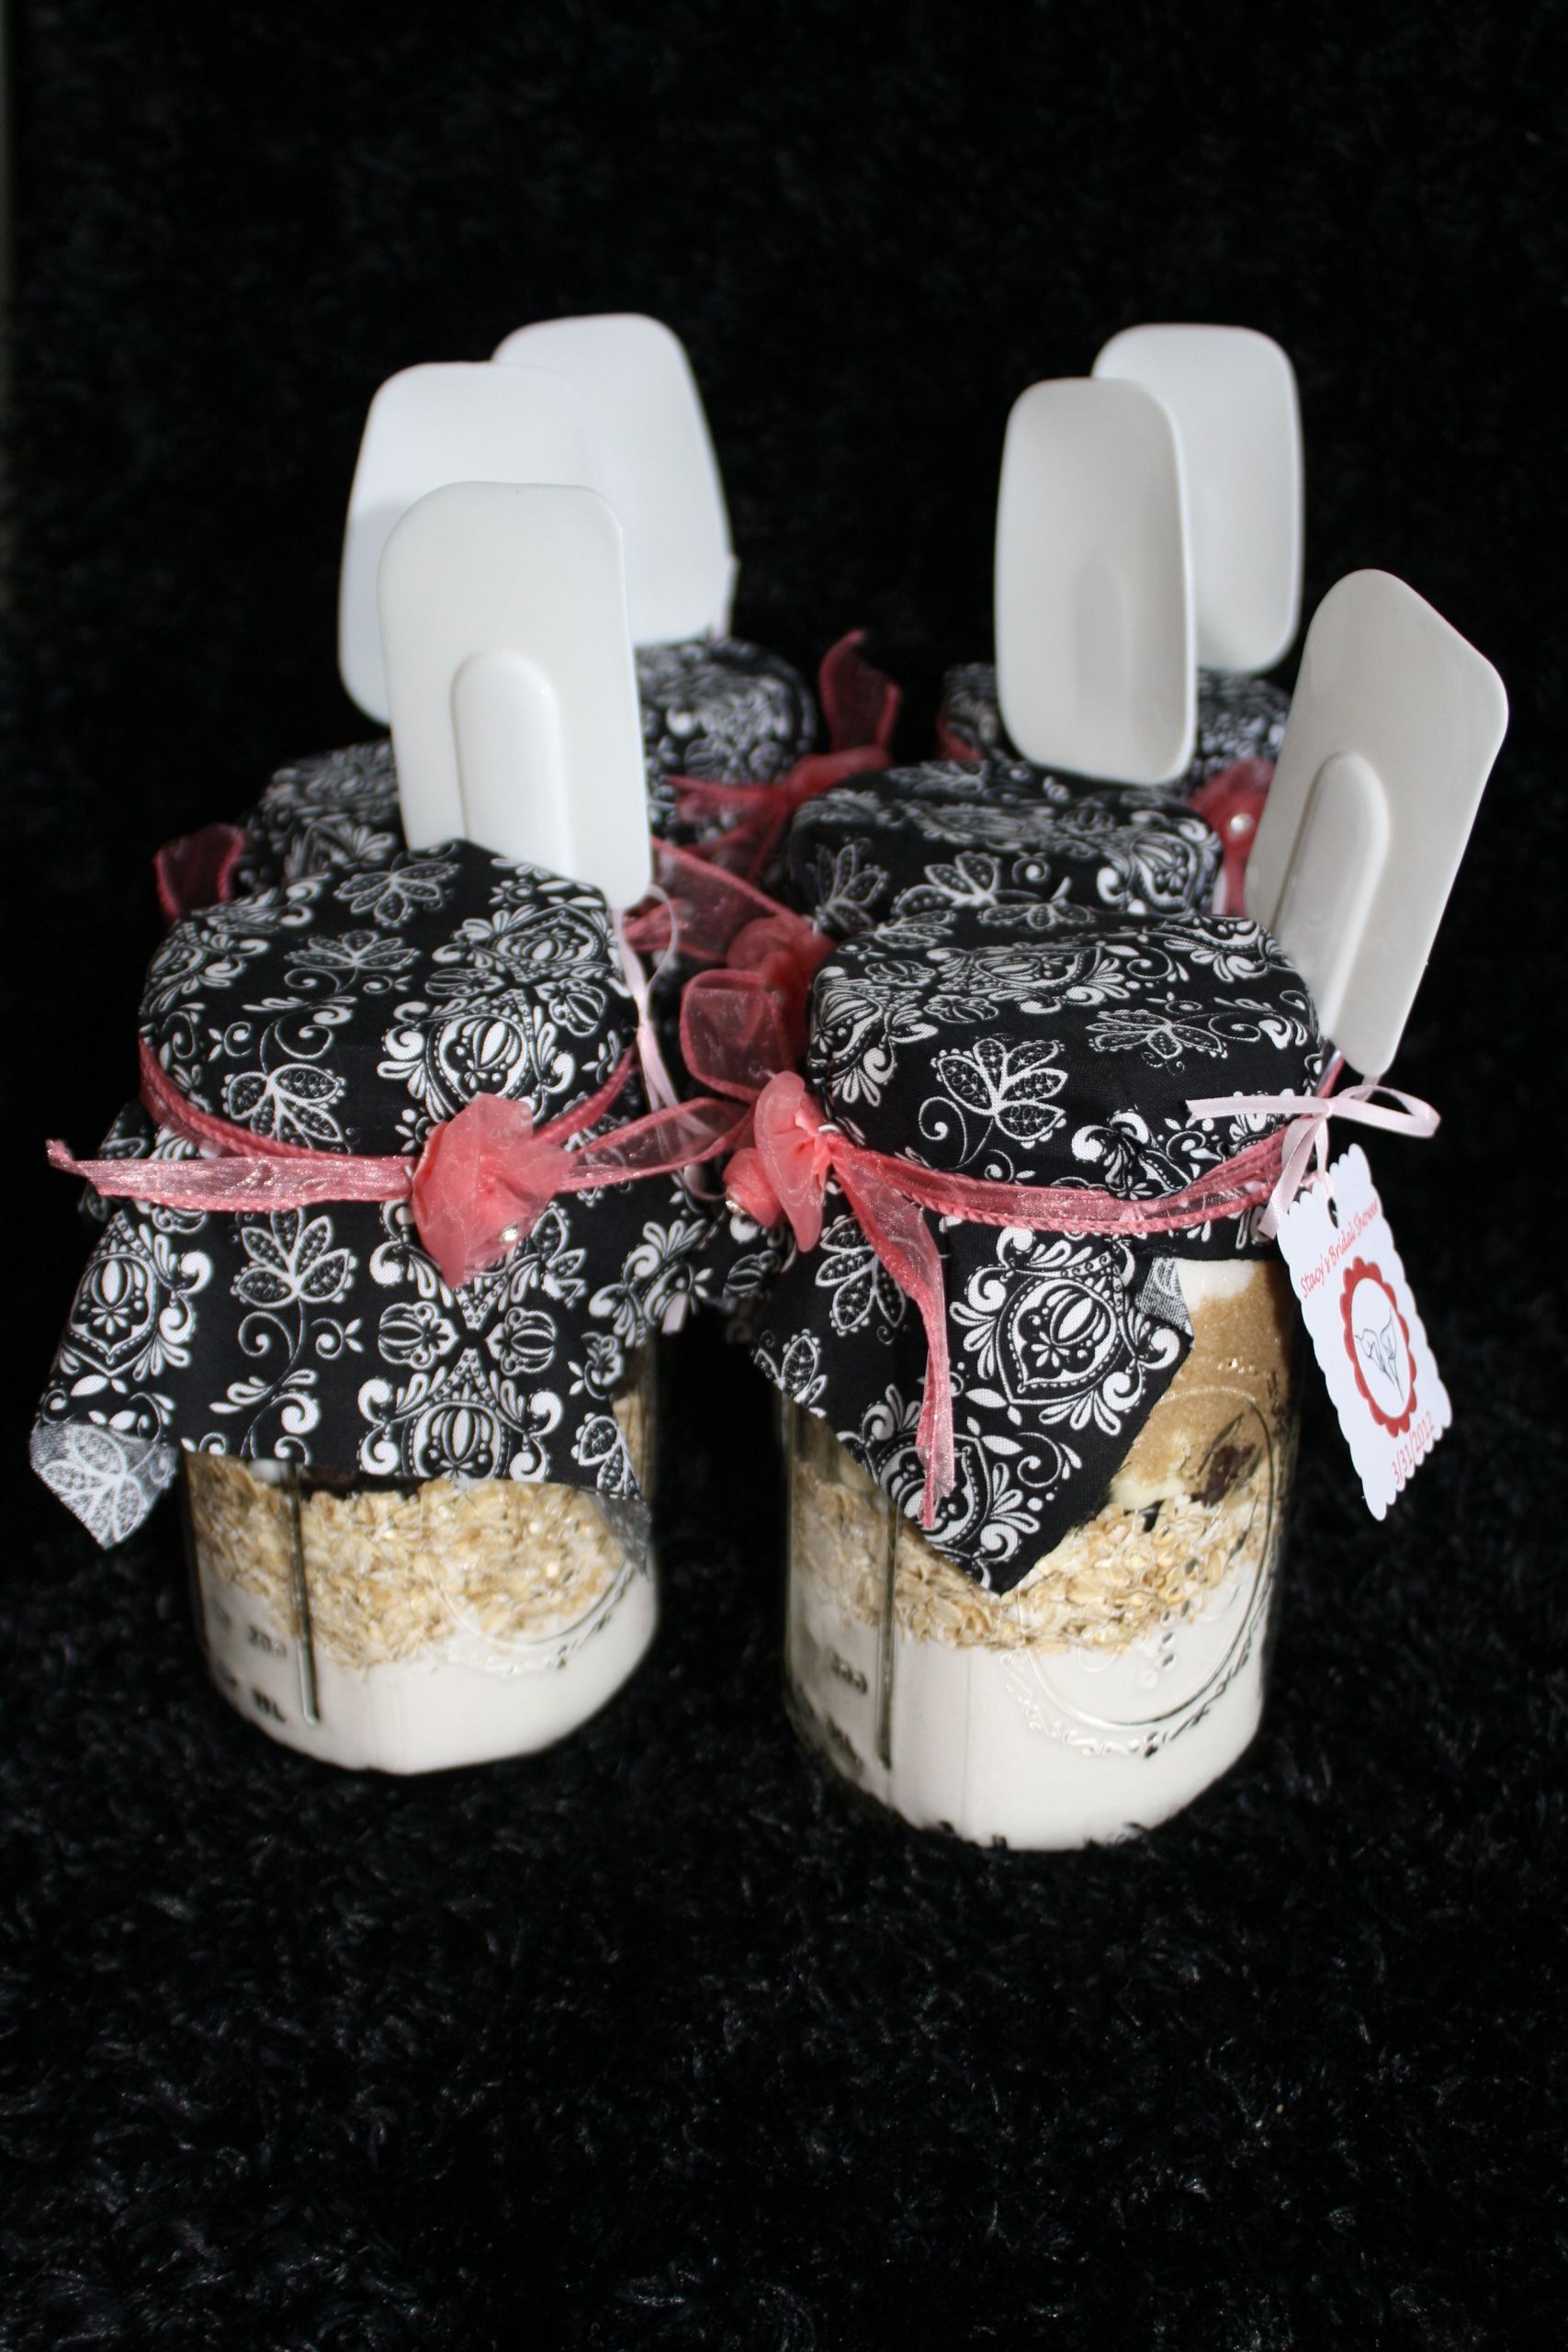 Wedding Shower Host Gift Ideas
 Cookies mixes that I made up for hostess ts at my